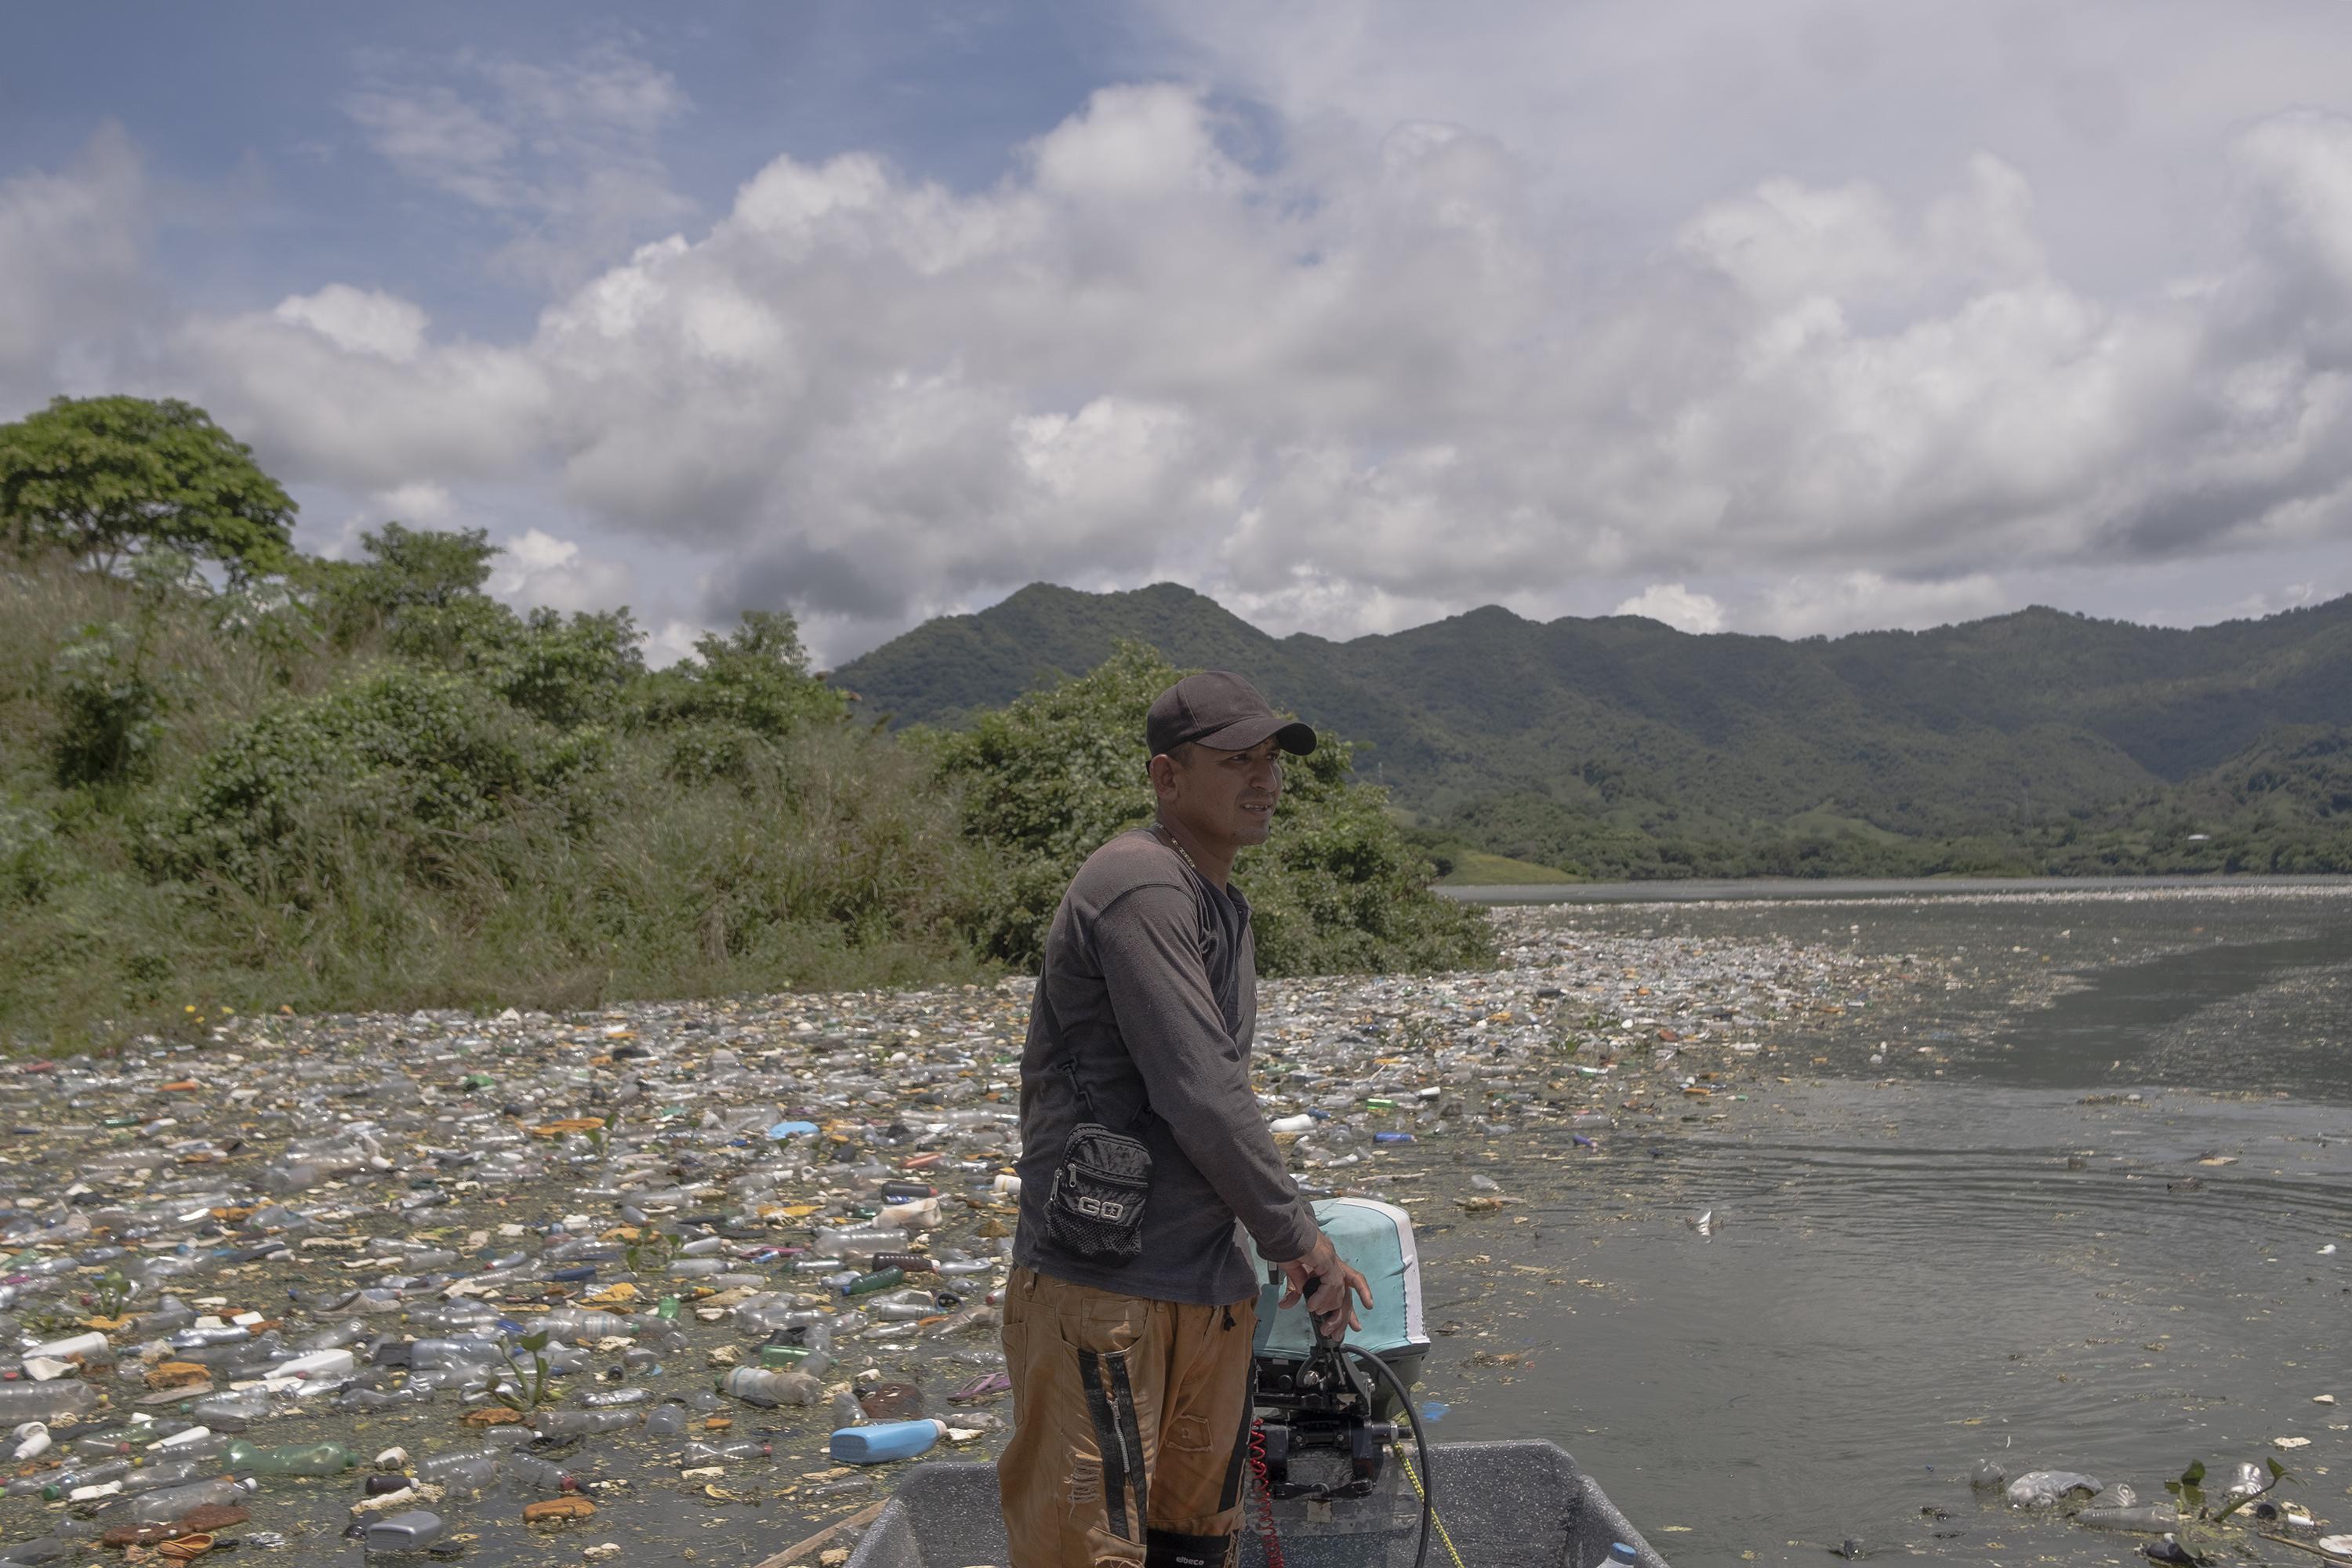 Mauricio Orellana is a fisherman from Potonico. He does his work by diving into the Cerrón Grande reservoir water and shooting fish with a harpoon. Since the plastic garbage arrived at his fishing area, he has had to reduce his workdays to make time to clean up the trash. “Before the garbage arrived, I used to Catch 14 dozen tilapias a day; after expenses, that left me with $30 to $40 a day; now, I don